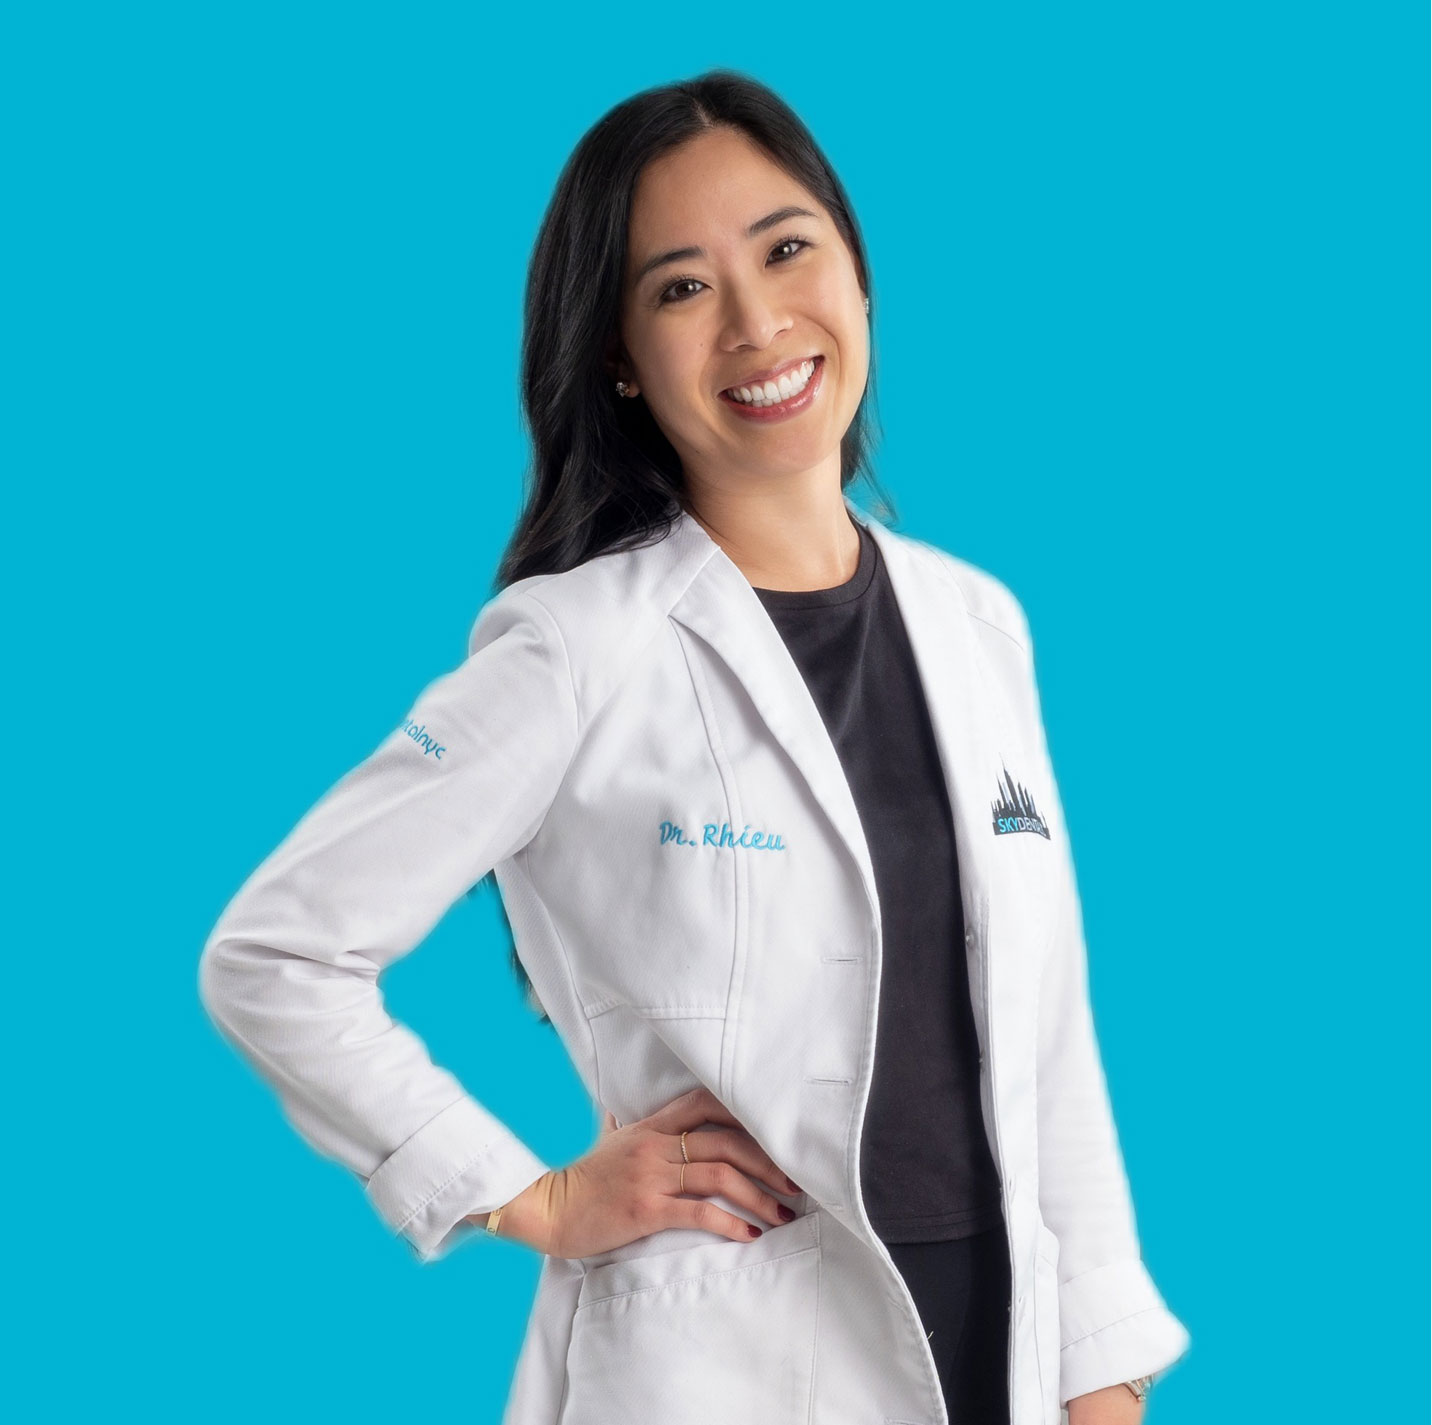 Dr. Wonnie Rhieu of Sky Dental, cosmetic and general dentist. She wears a white dental coat, hand on hip, smiling.